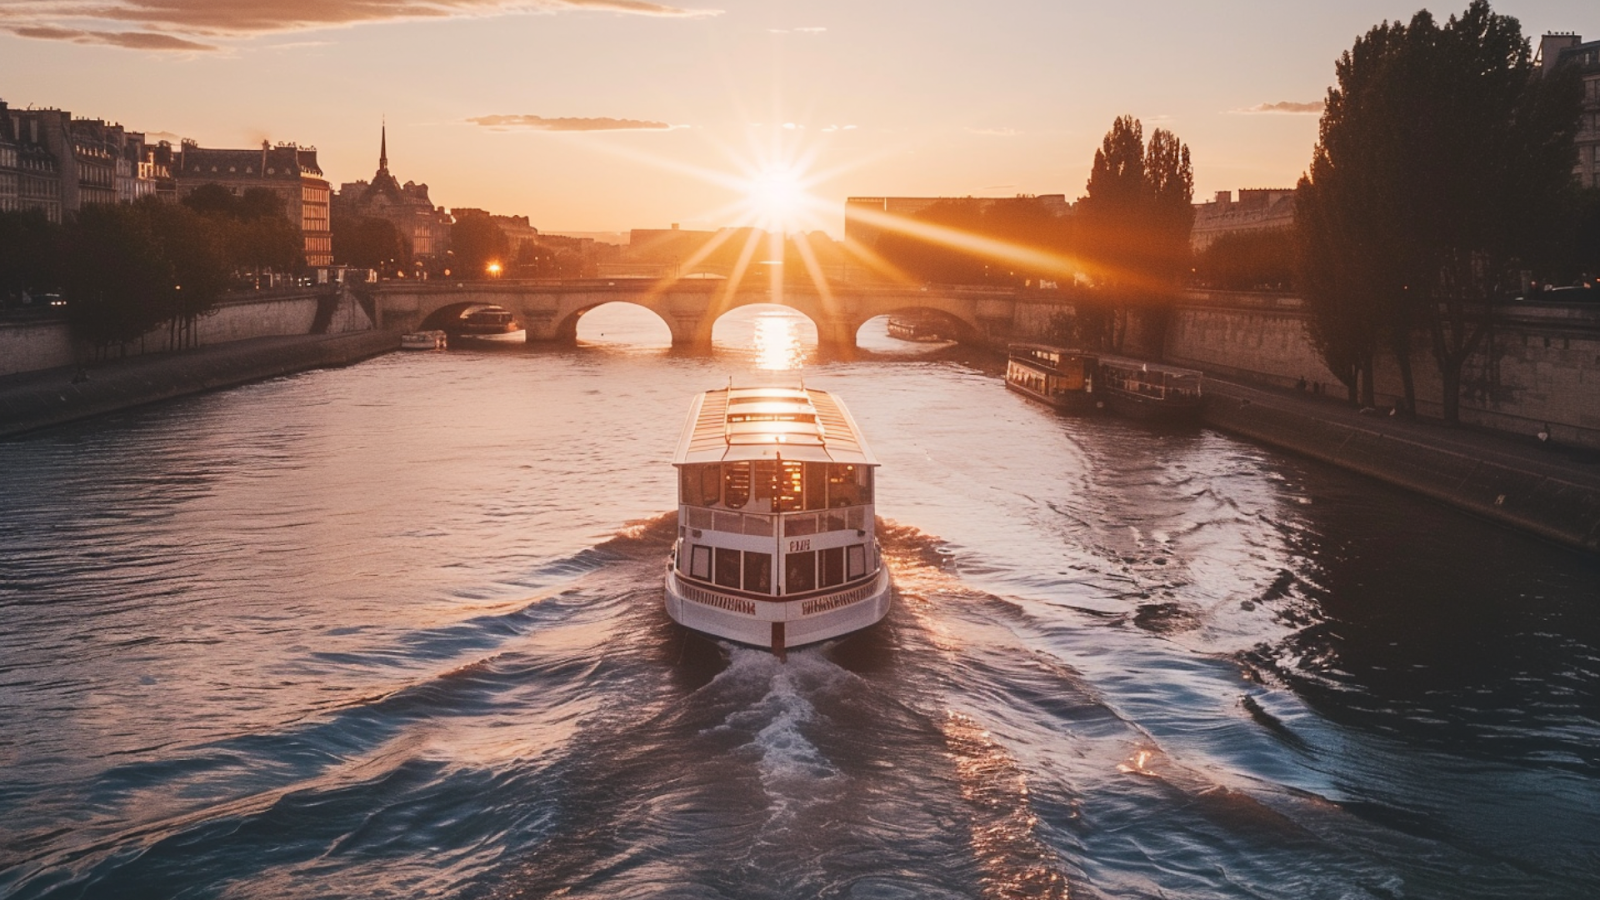  A boat cruising along the Seine River in Paris during sunse